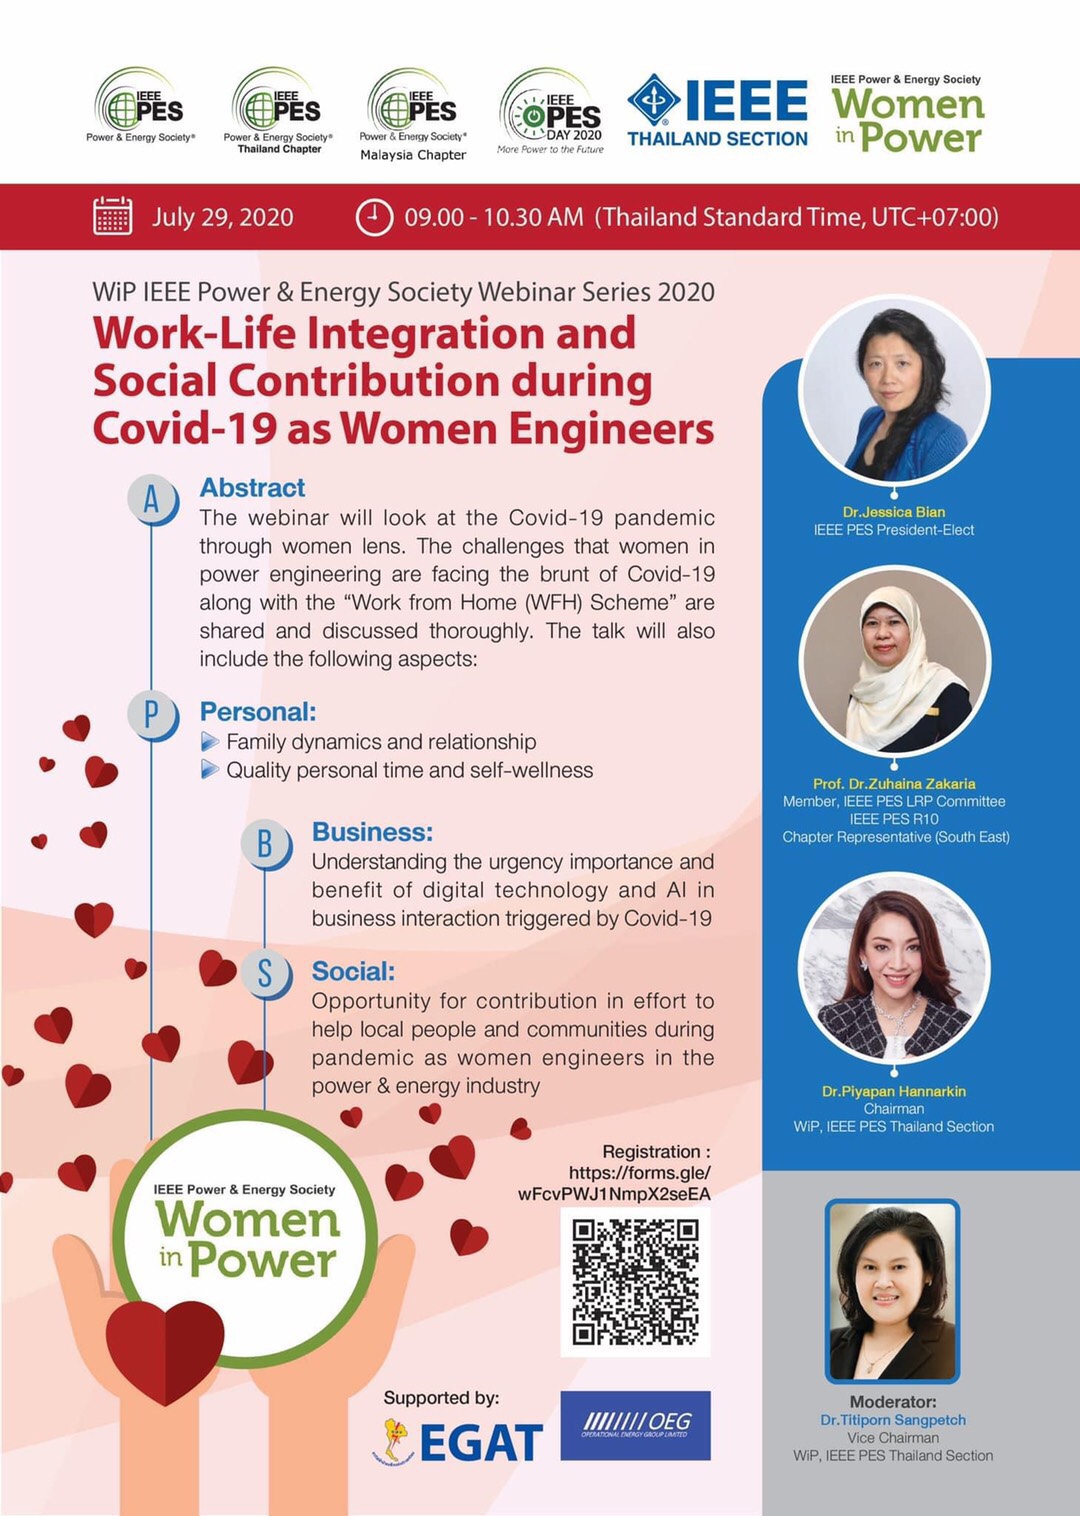 The IEEE Power & Energy Society – Thailand proudly presents to you an informative WiP IEEE PES webinar on “ Work-Life Integration and Social Contribution during Covid-19 as Women Engineers“.